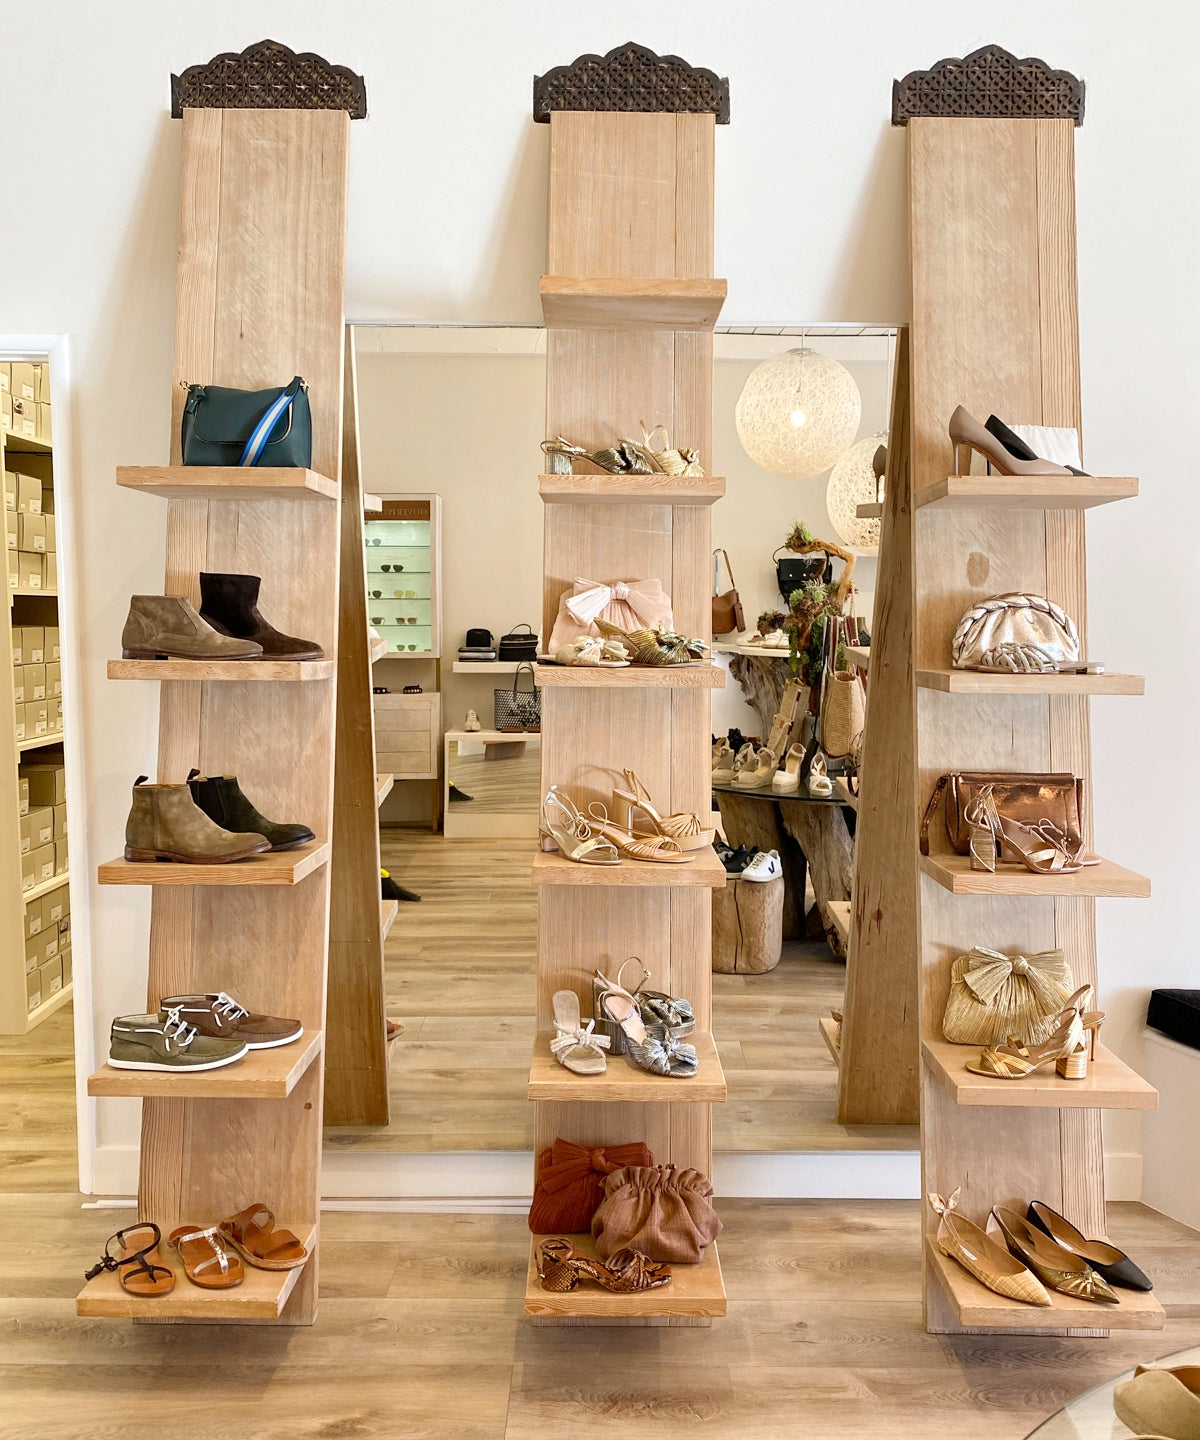 DIANI Shoes remodel